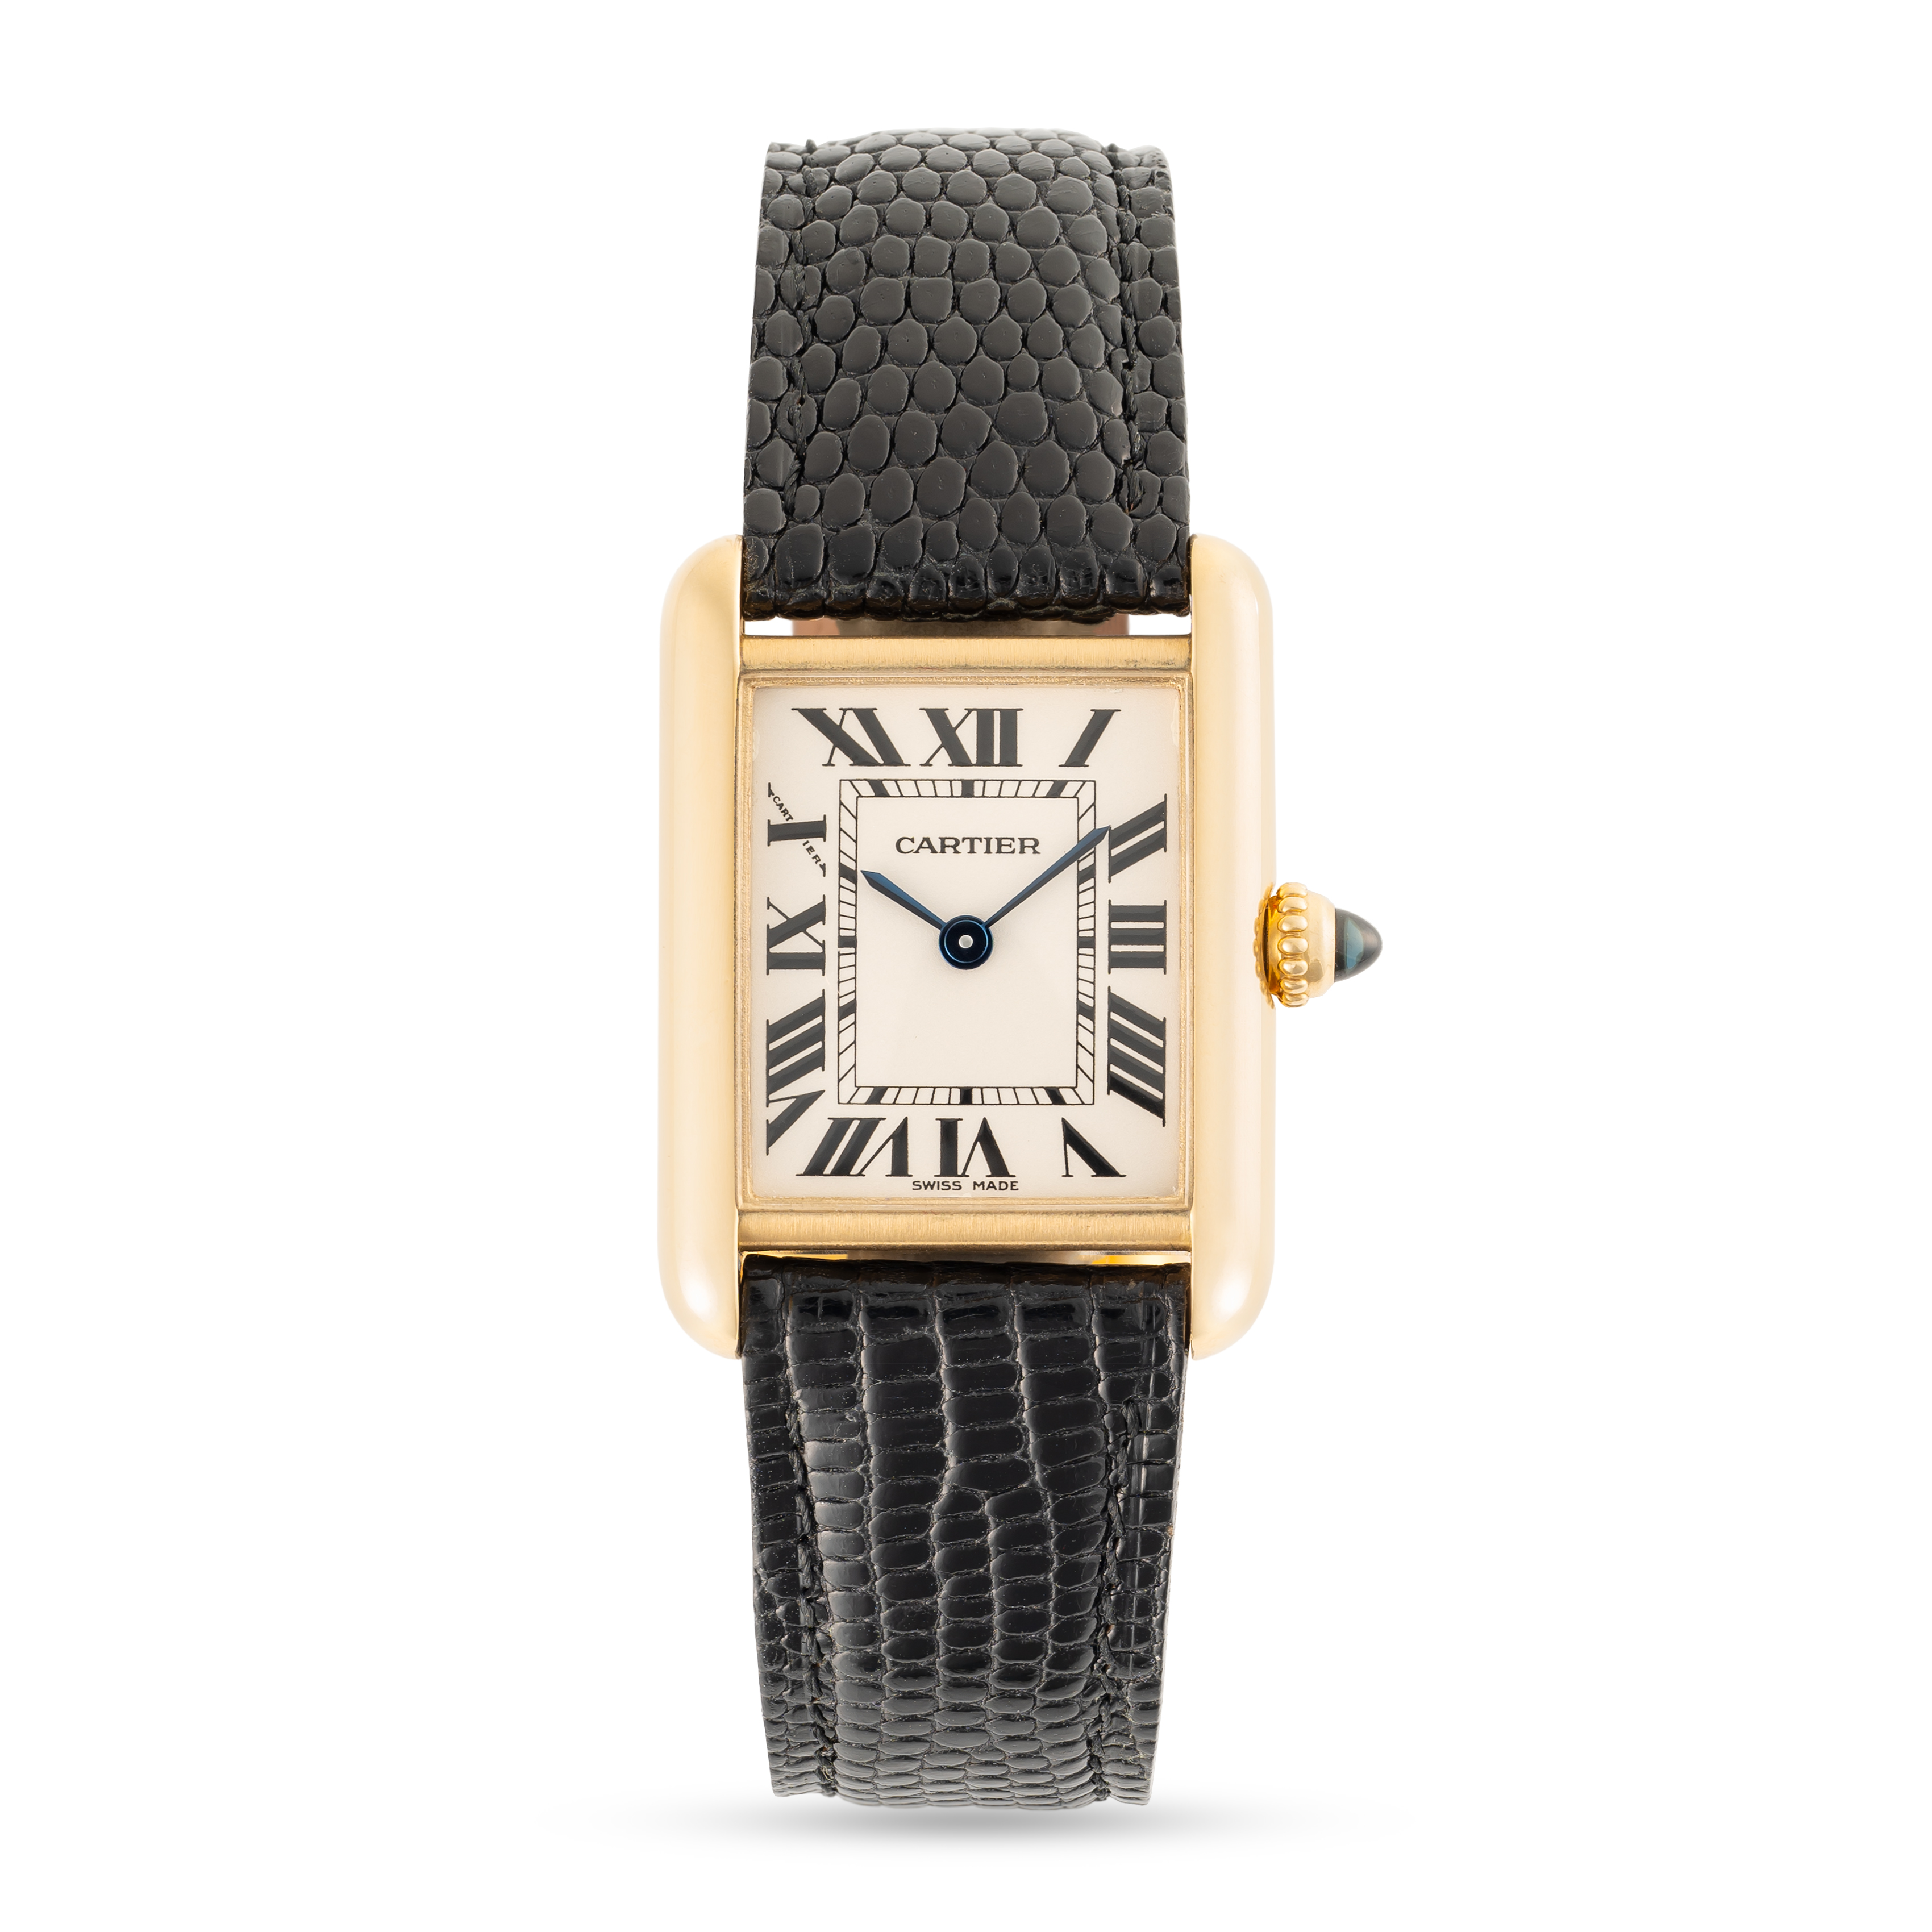 A LADY'S 18K SOLID GOLD CARTIER TANK LOUIS WRIST WATCH CIRCA 2000s, REF. 2442 WITH CARTIER SERVICE - Image 2 of 8